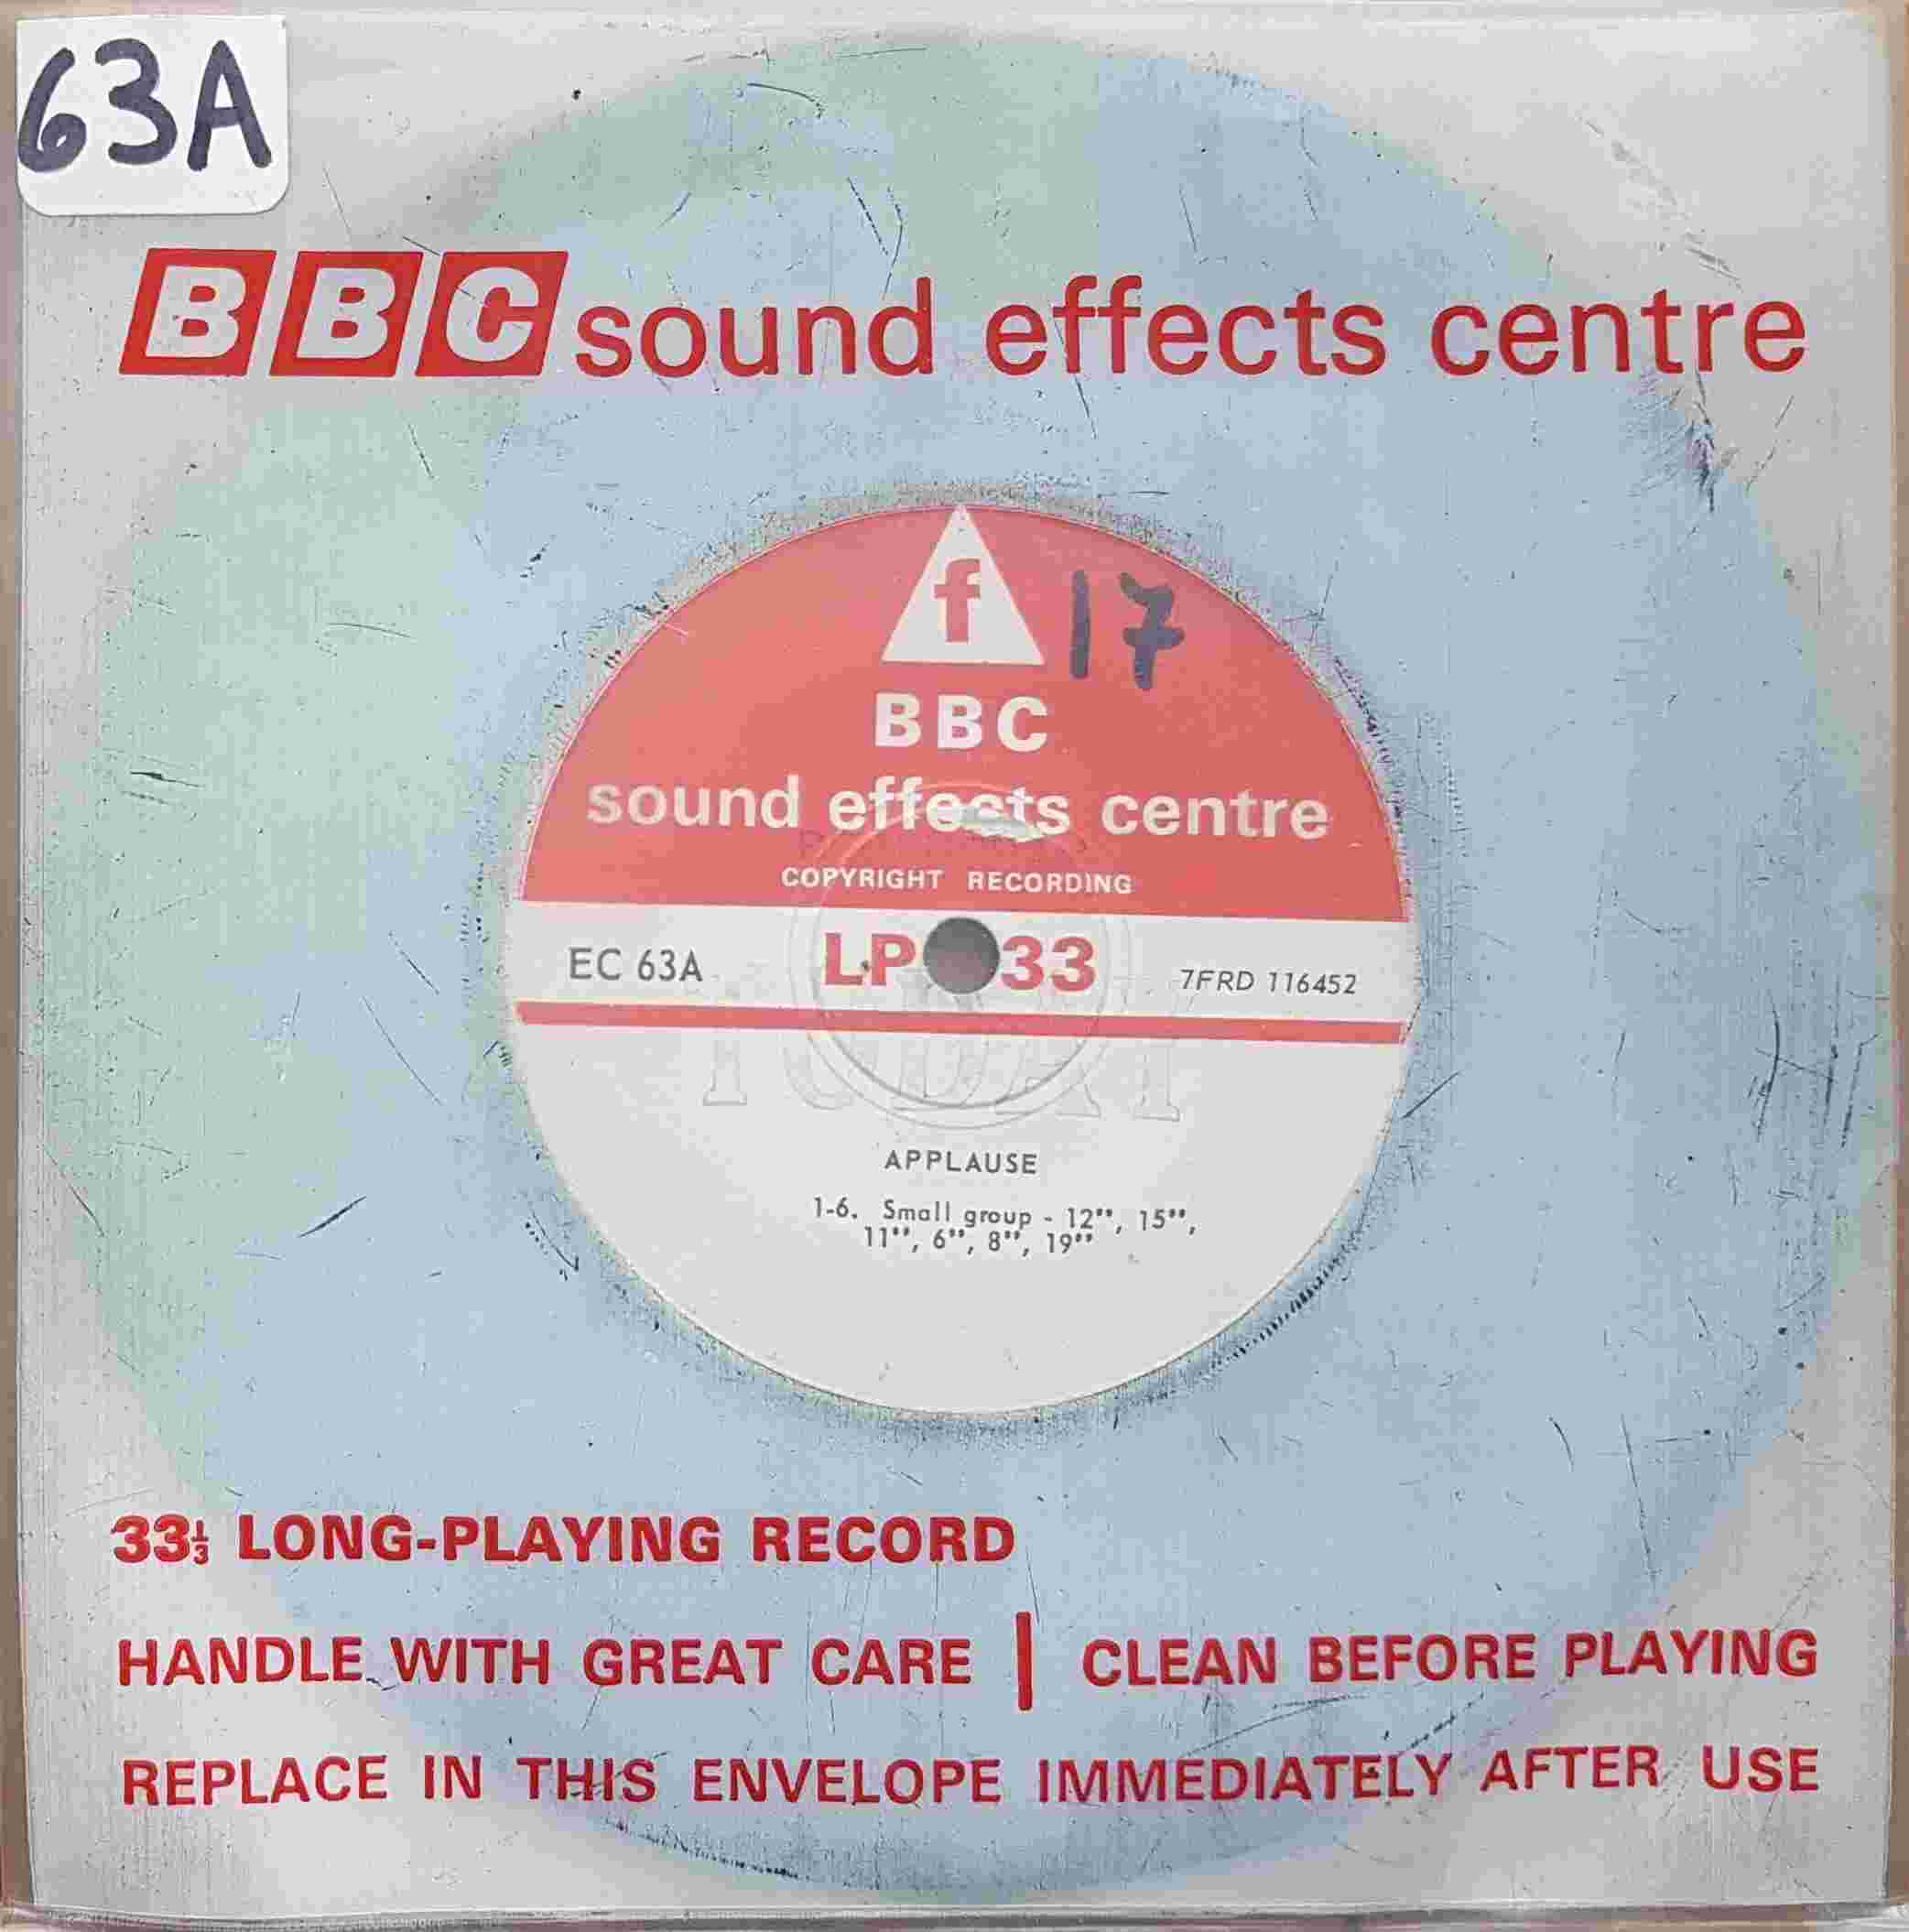 Picture of EC 63A Applause by artist Not registered from the BBC records and Tapes library